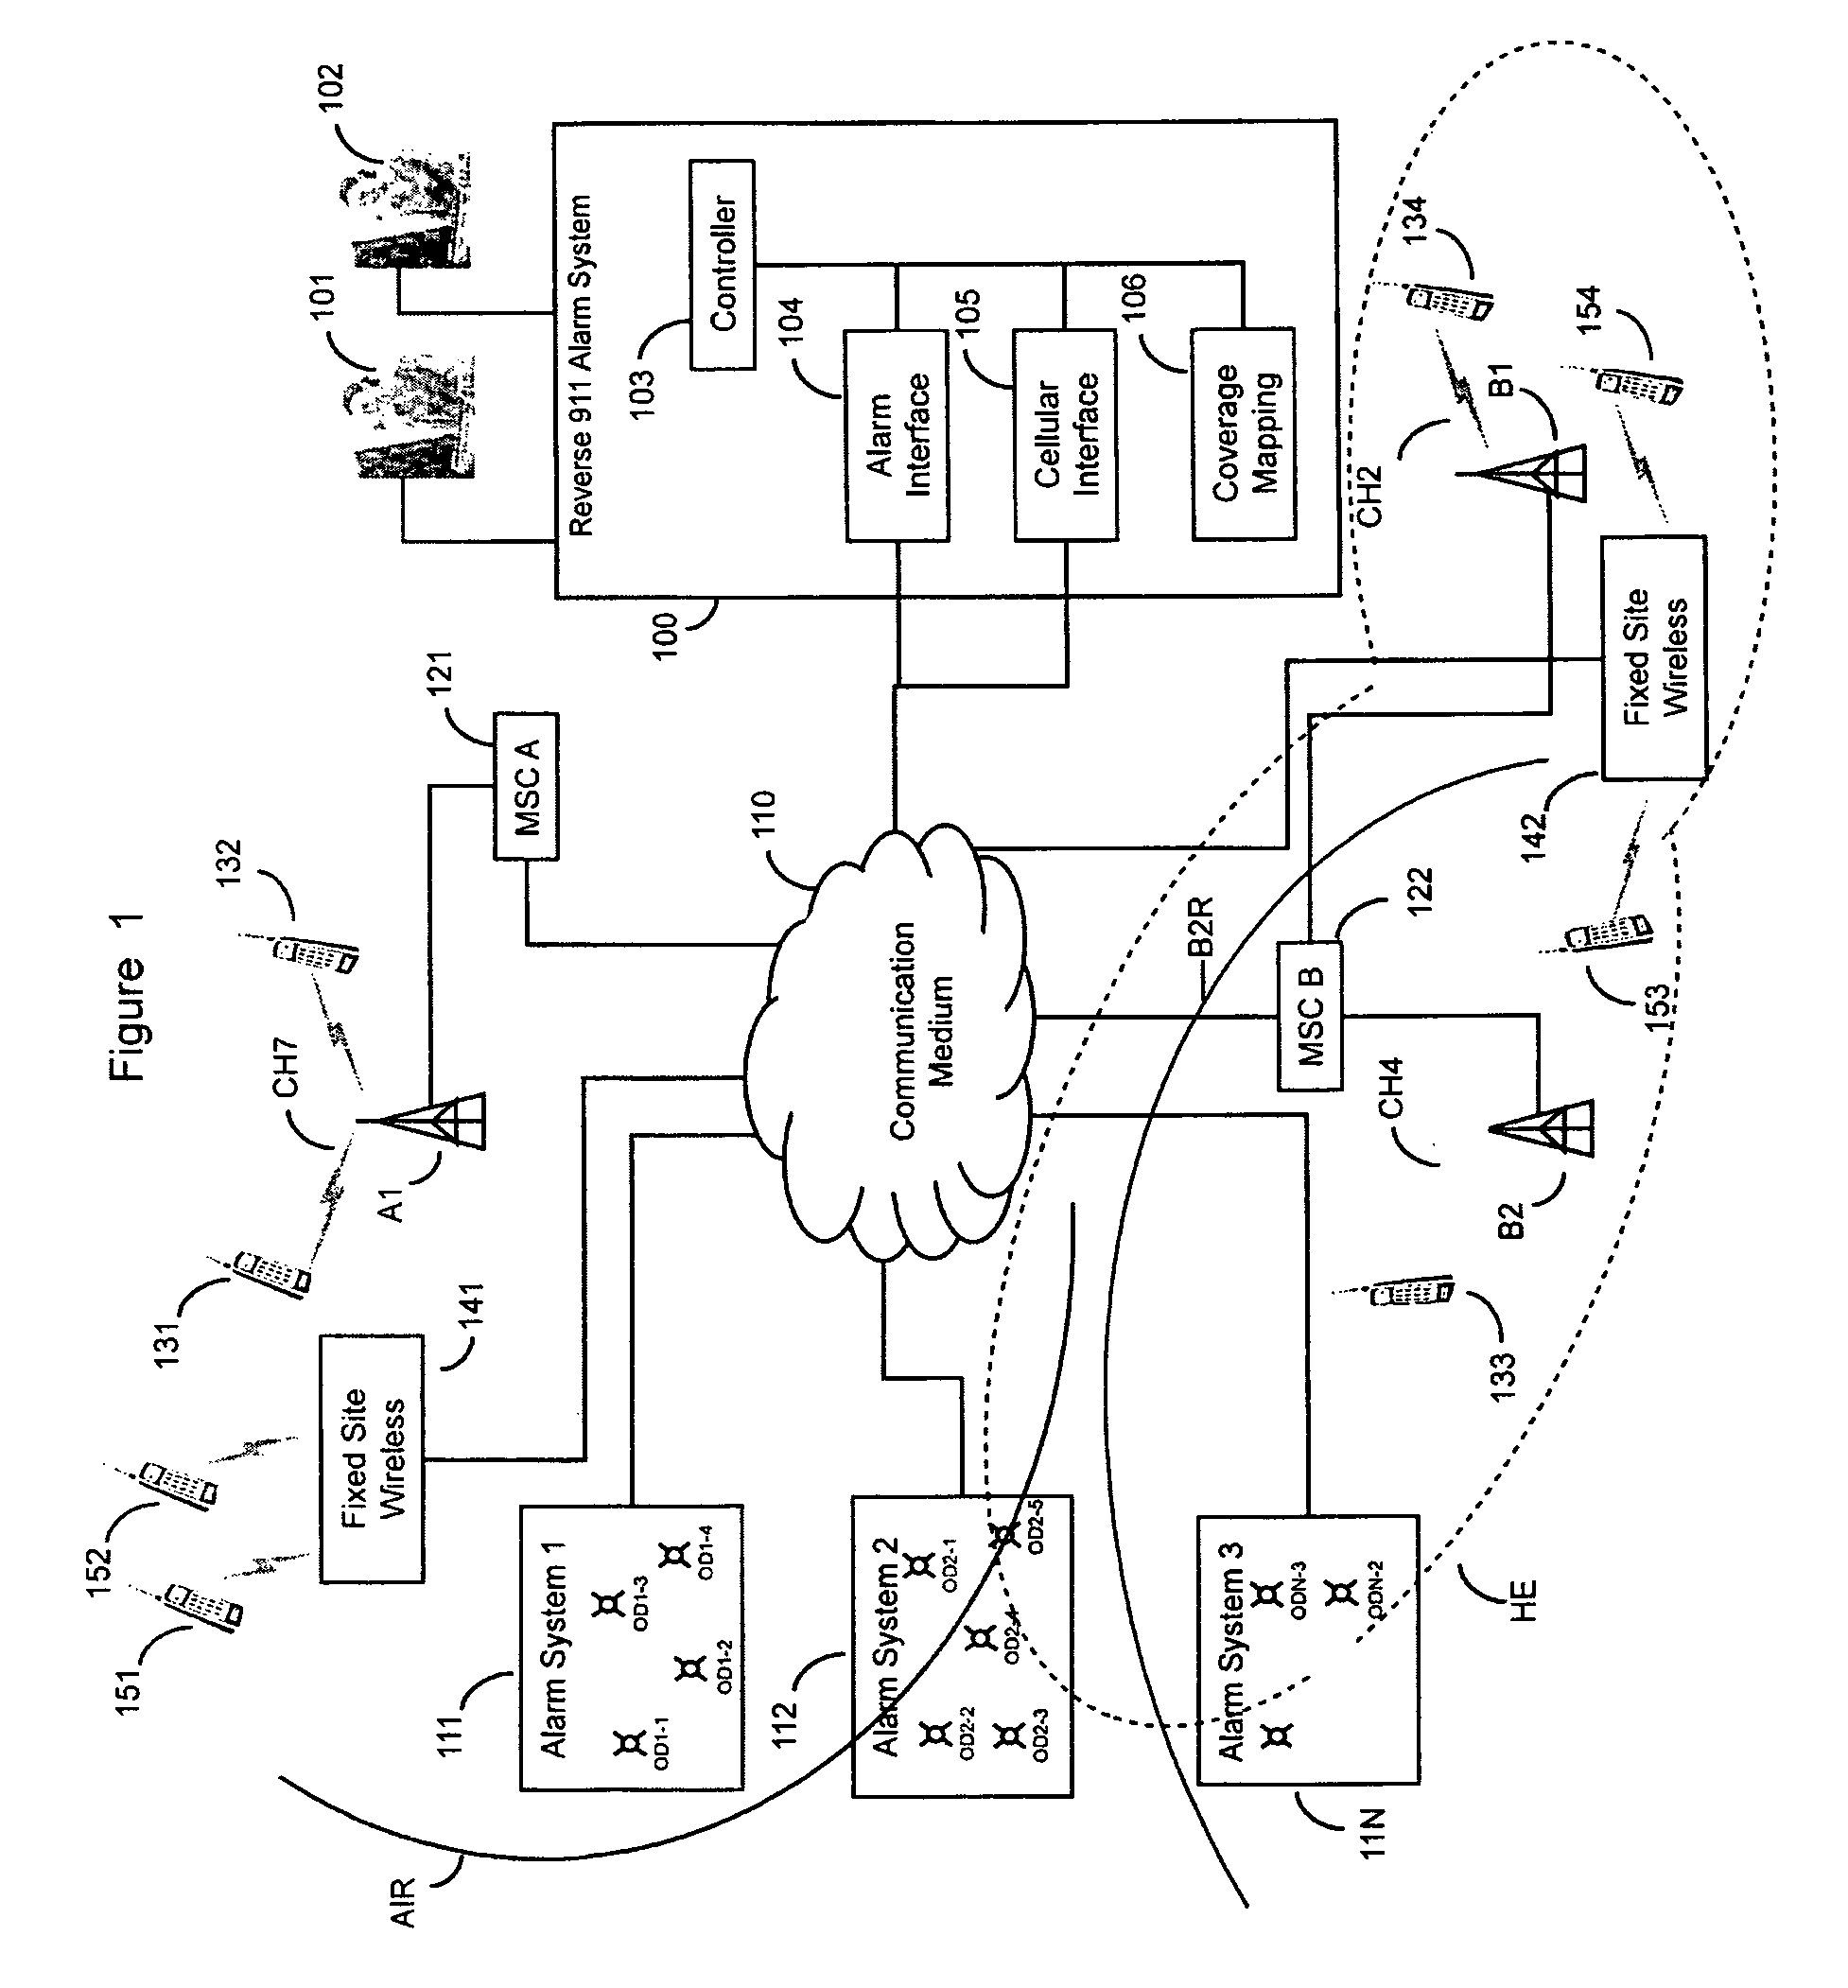 System for controlling the operation of wireless multicasting systems to distribute an alarm indication to a dynamically configured coverage area